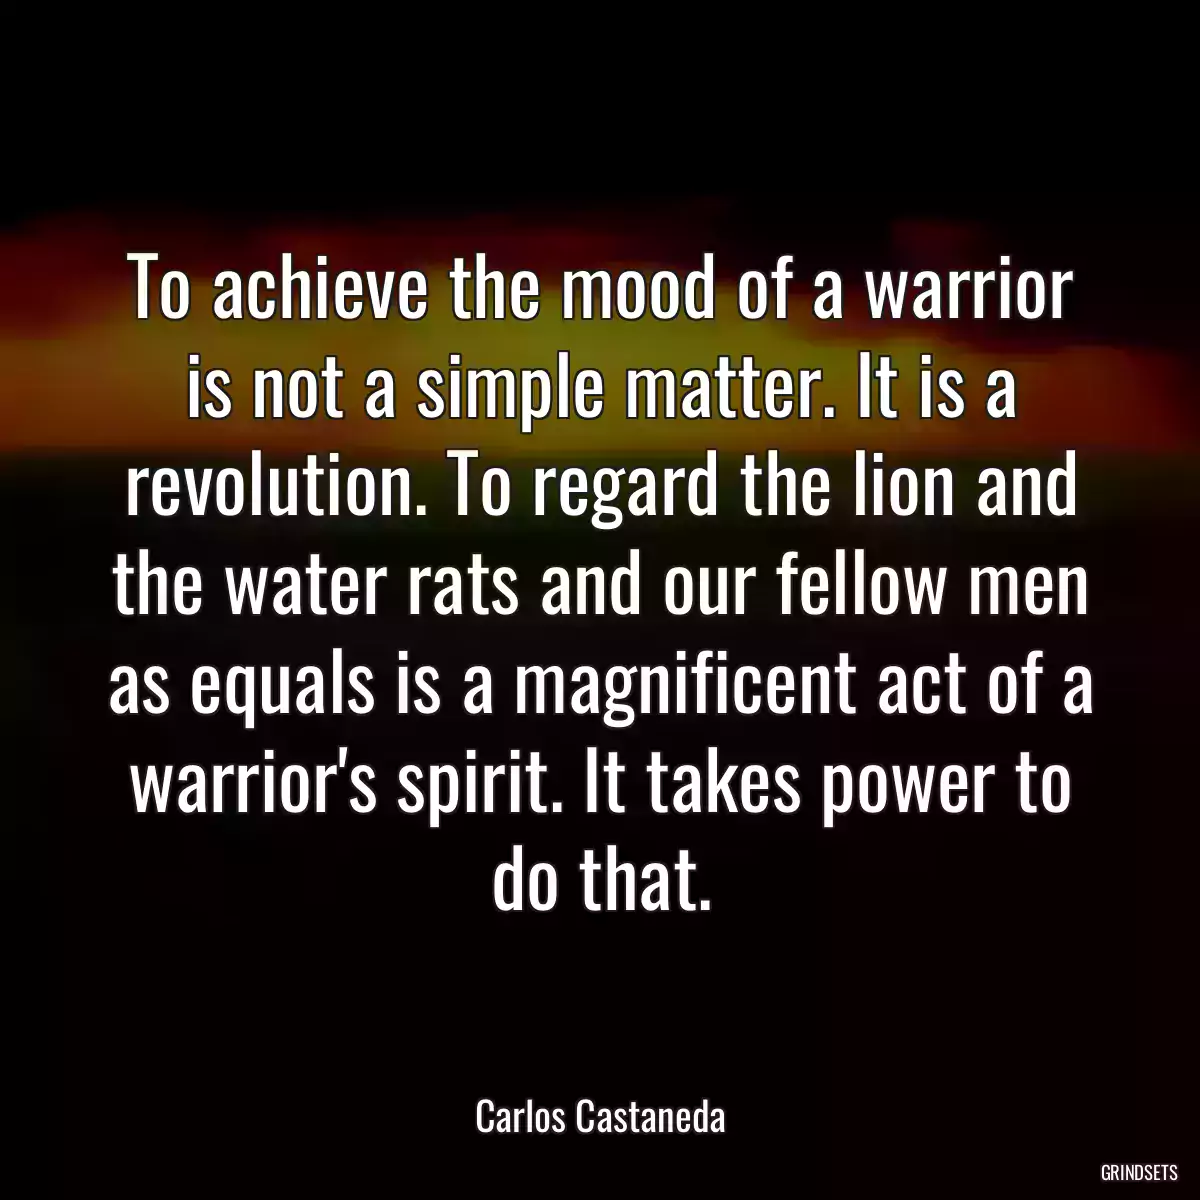 To achieve the mood of a warrior is not a simple matter. It is a revolution. To regard the lion and the water rats and our fellow men as equals is a magnificent act of a warrior\'s spirit. It takes power to do that.